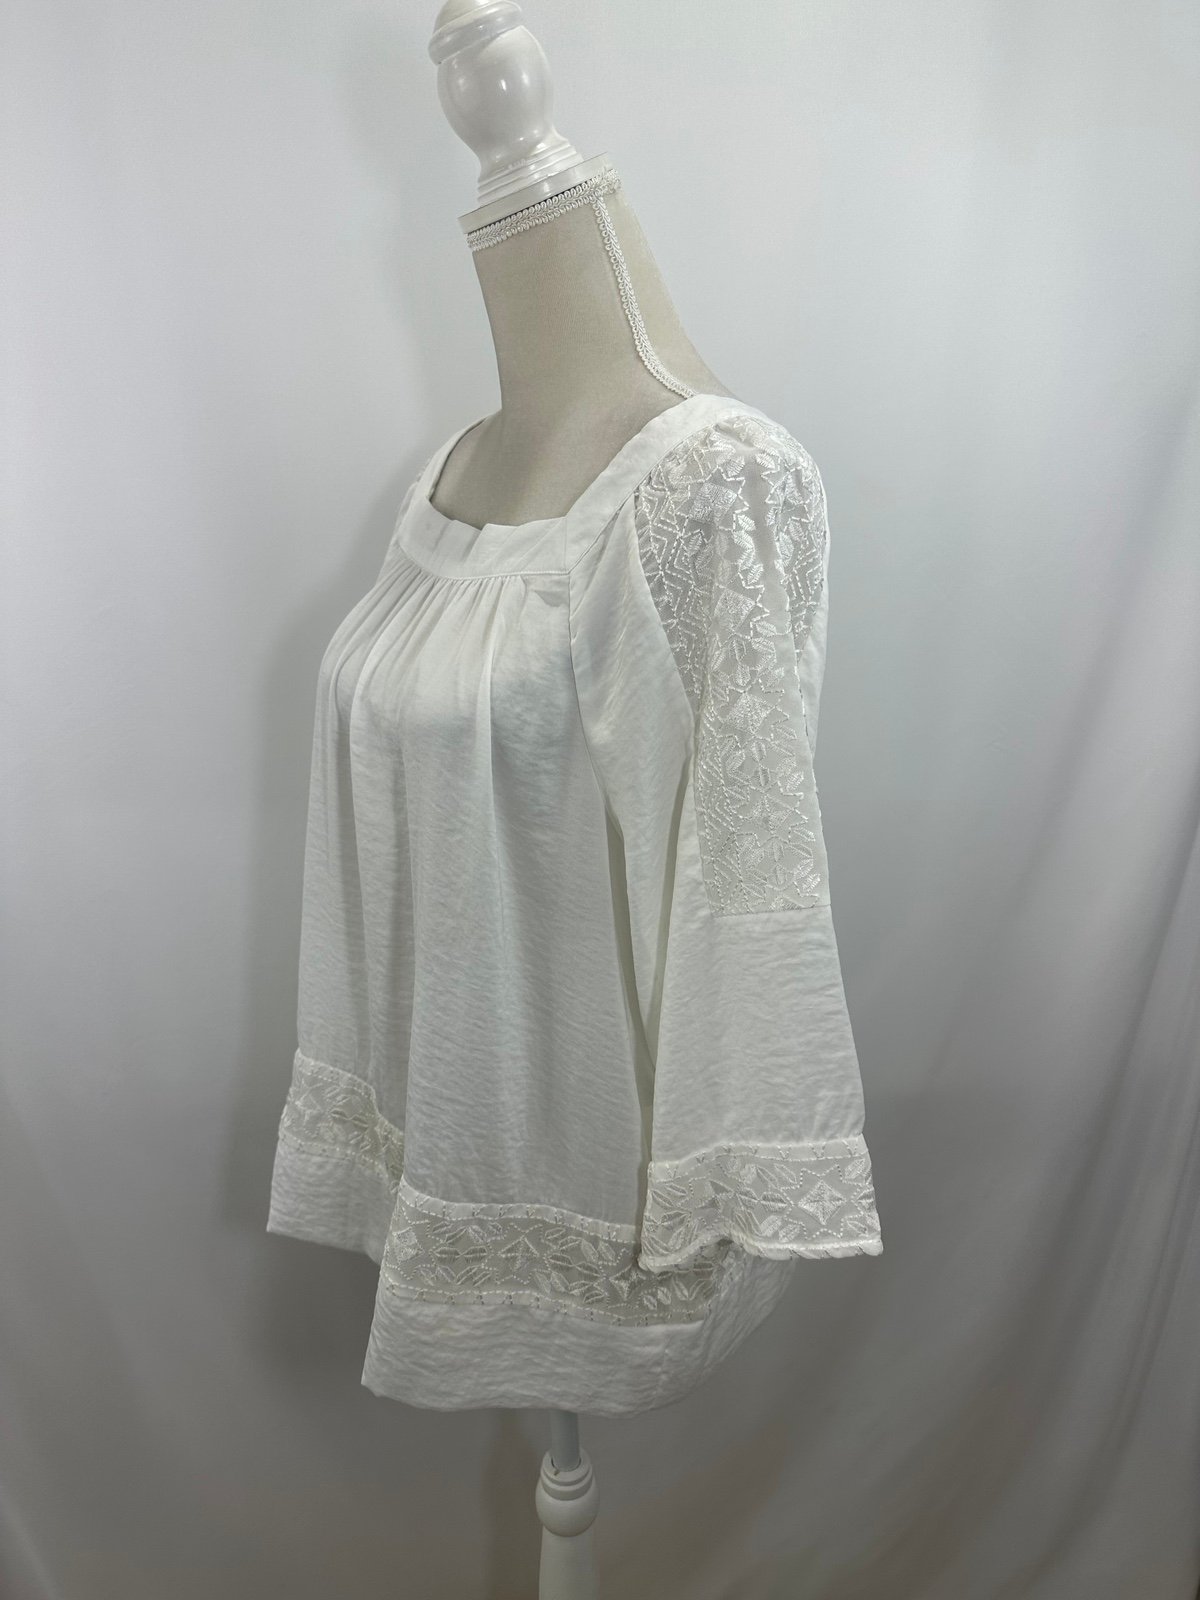 The Best Seller Adiva White Crushed Satin Lace Blouse Size L PRGehzvF2 Outlet Store